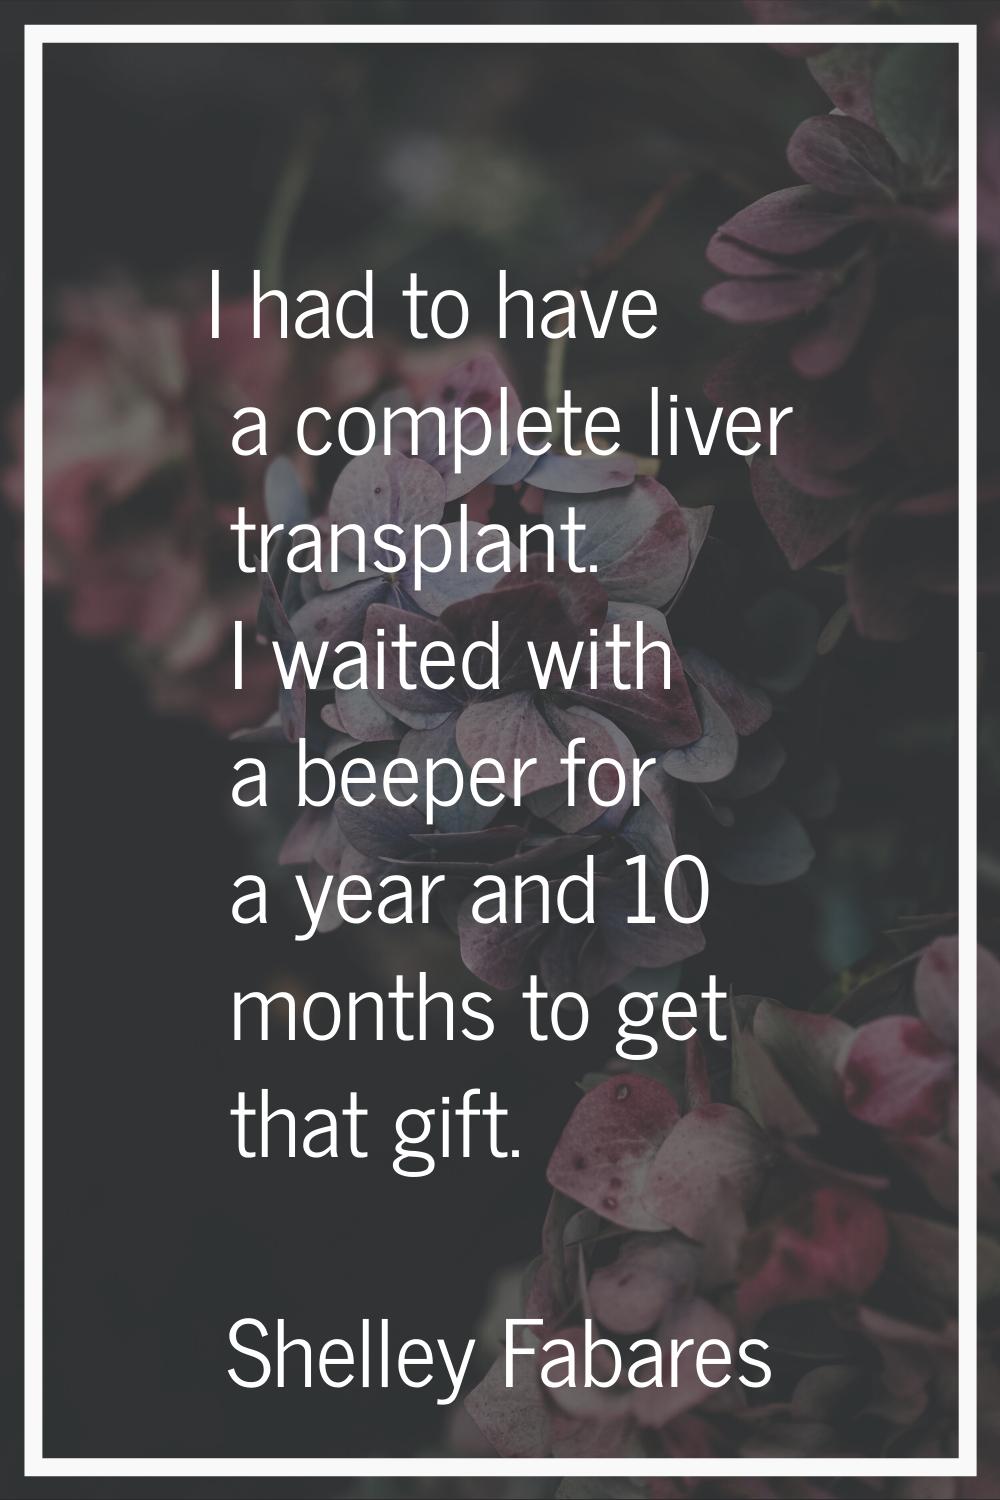 I had to have a complete liver transplant. I waited with a beeper for a year and 10 months to get t